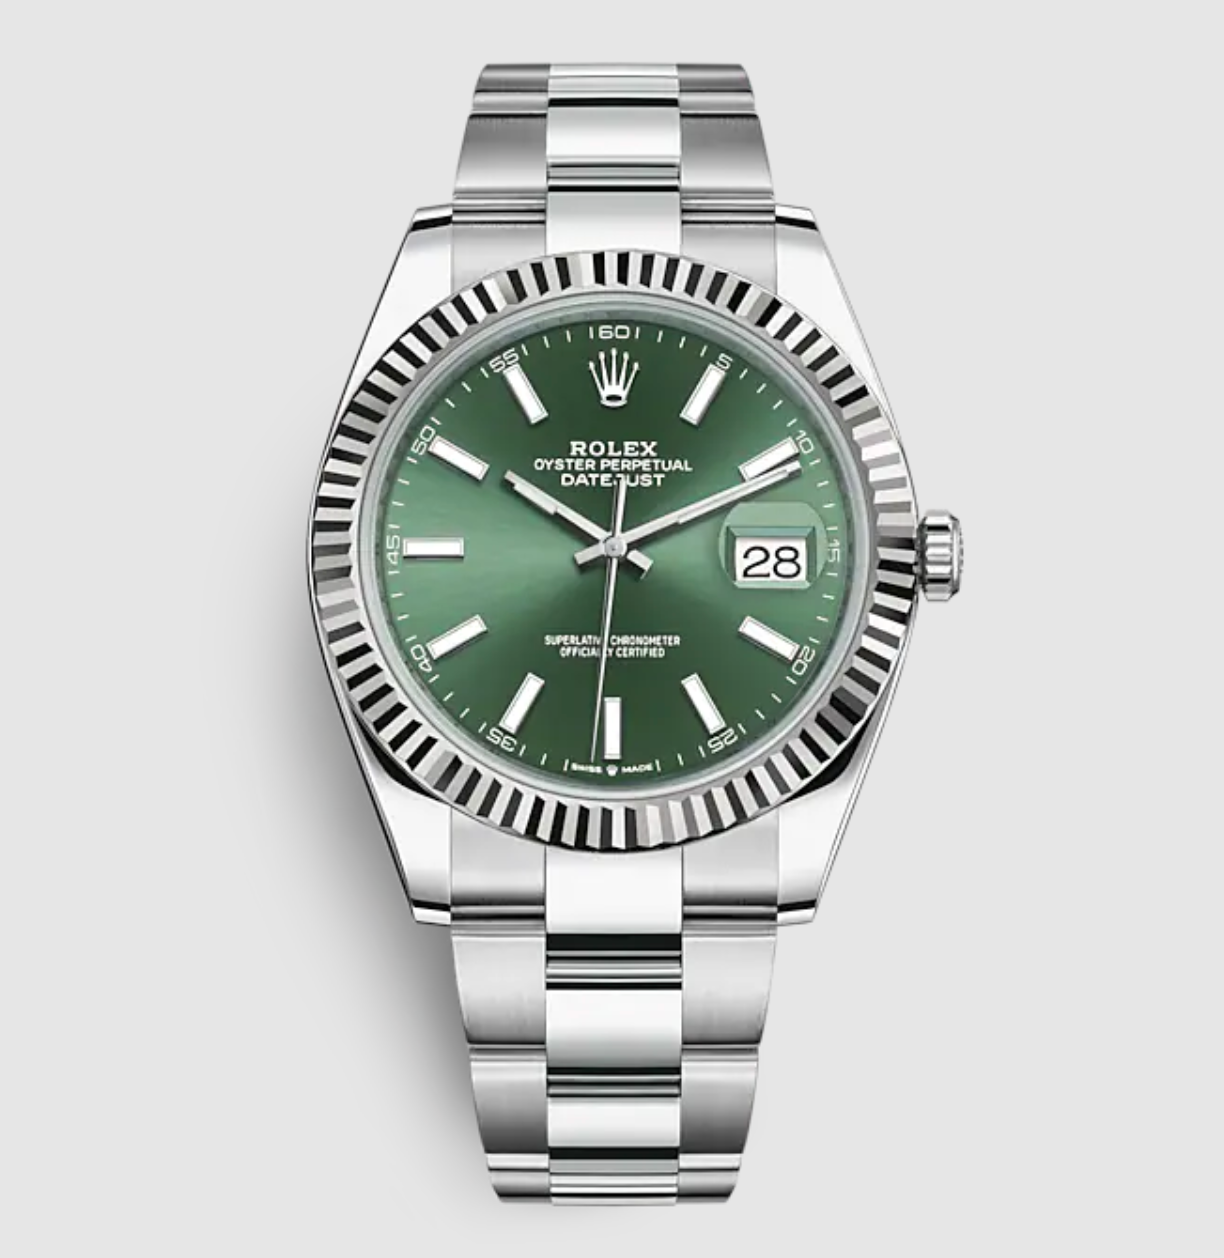 Replica Clone Date Just Rolex Silver with Green Dial new Model 2022 - IP Empire Replica Watches